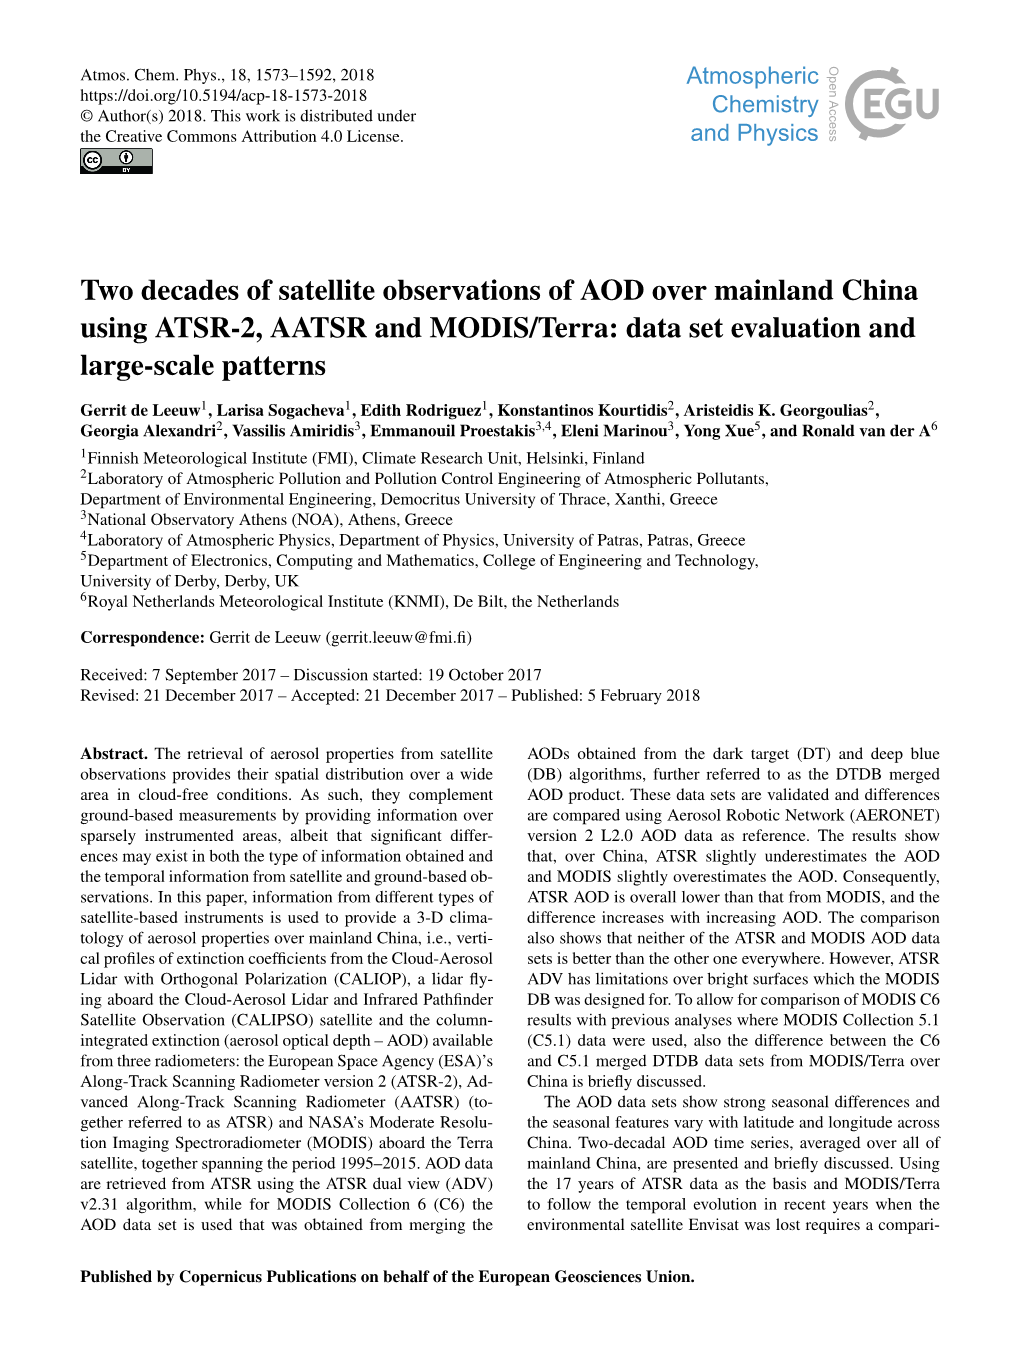 Two Decades of Satellite Observations of AOD Over Mainland China Using ATSR-2, AATSR and MODIS/Terra: Data Set Evaluation and Large-Scale Patterns